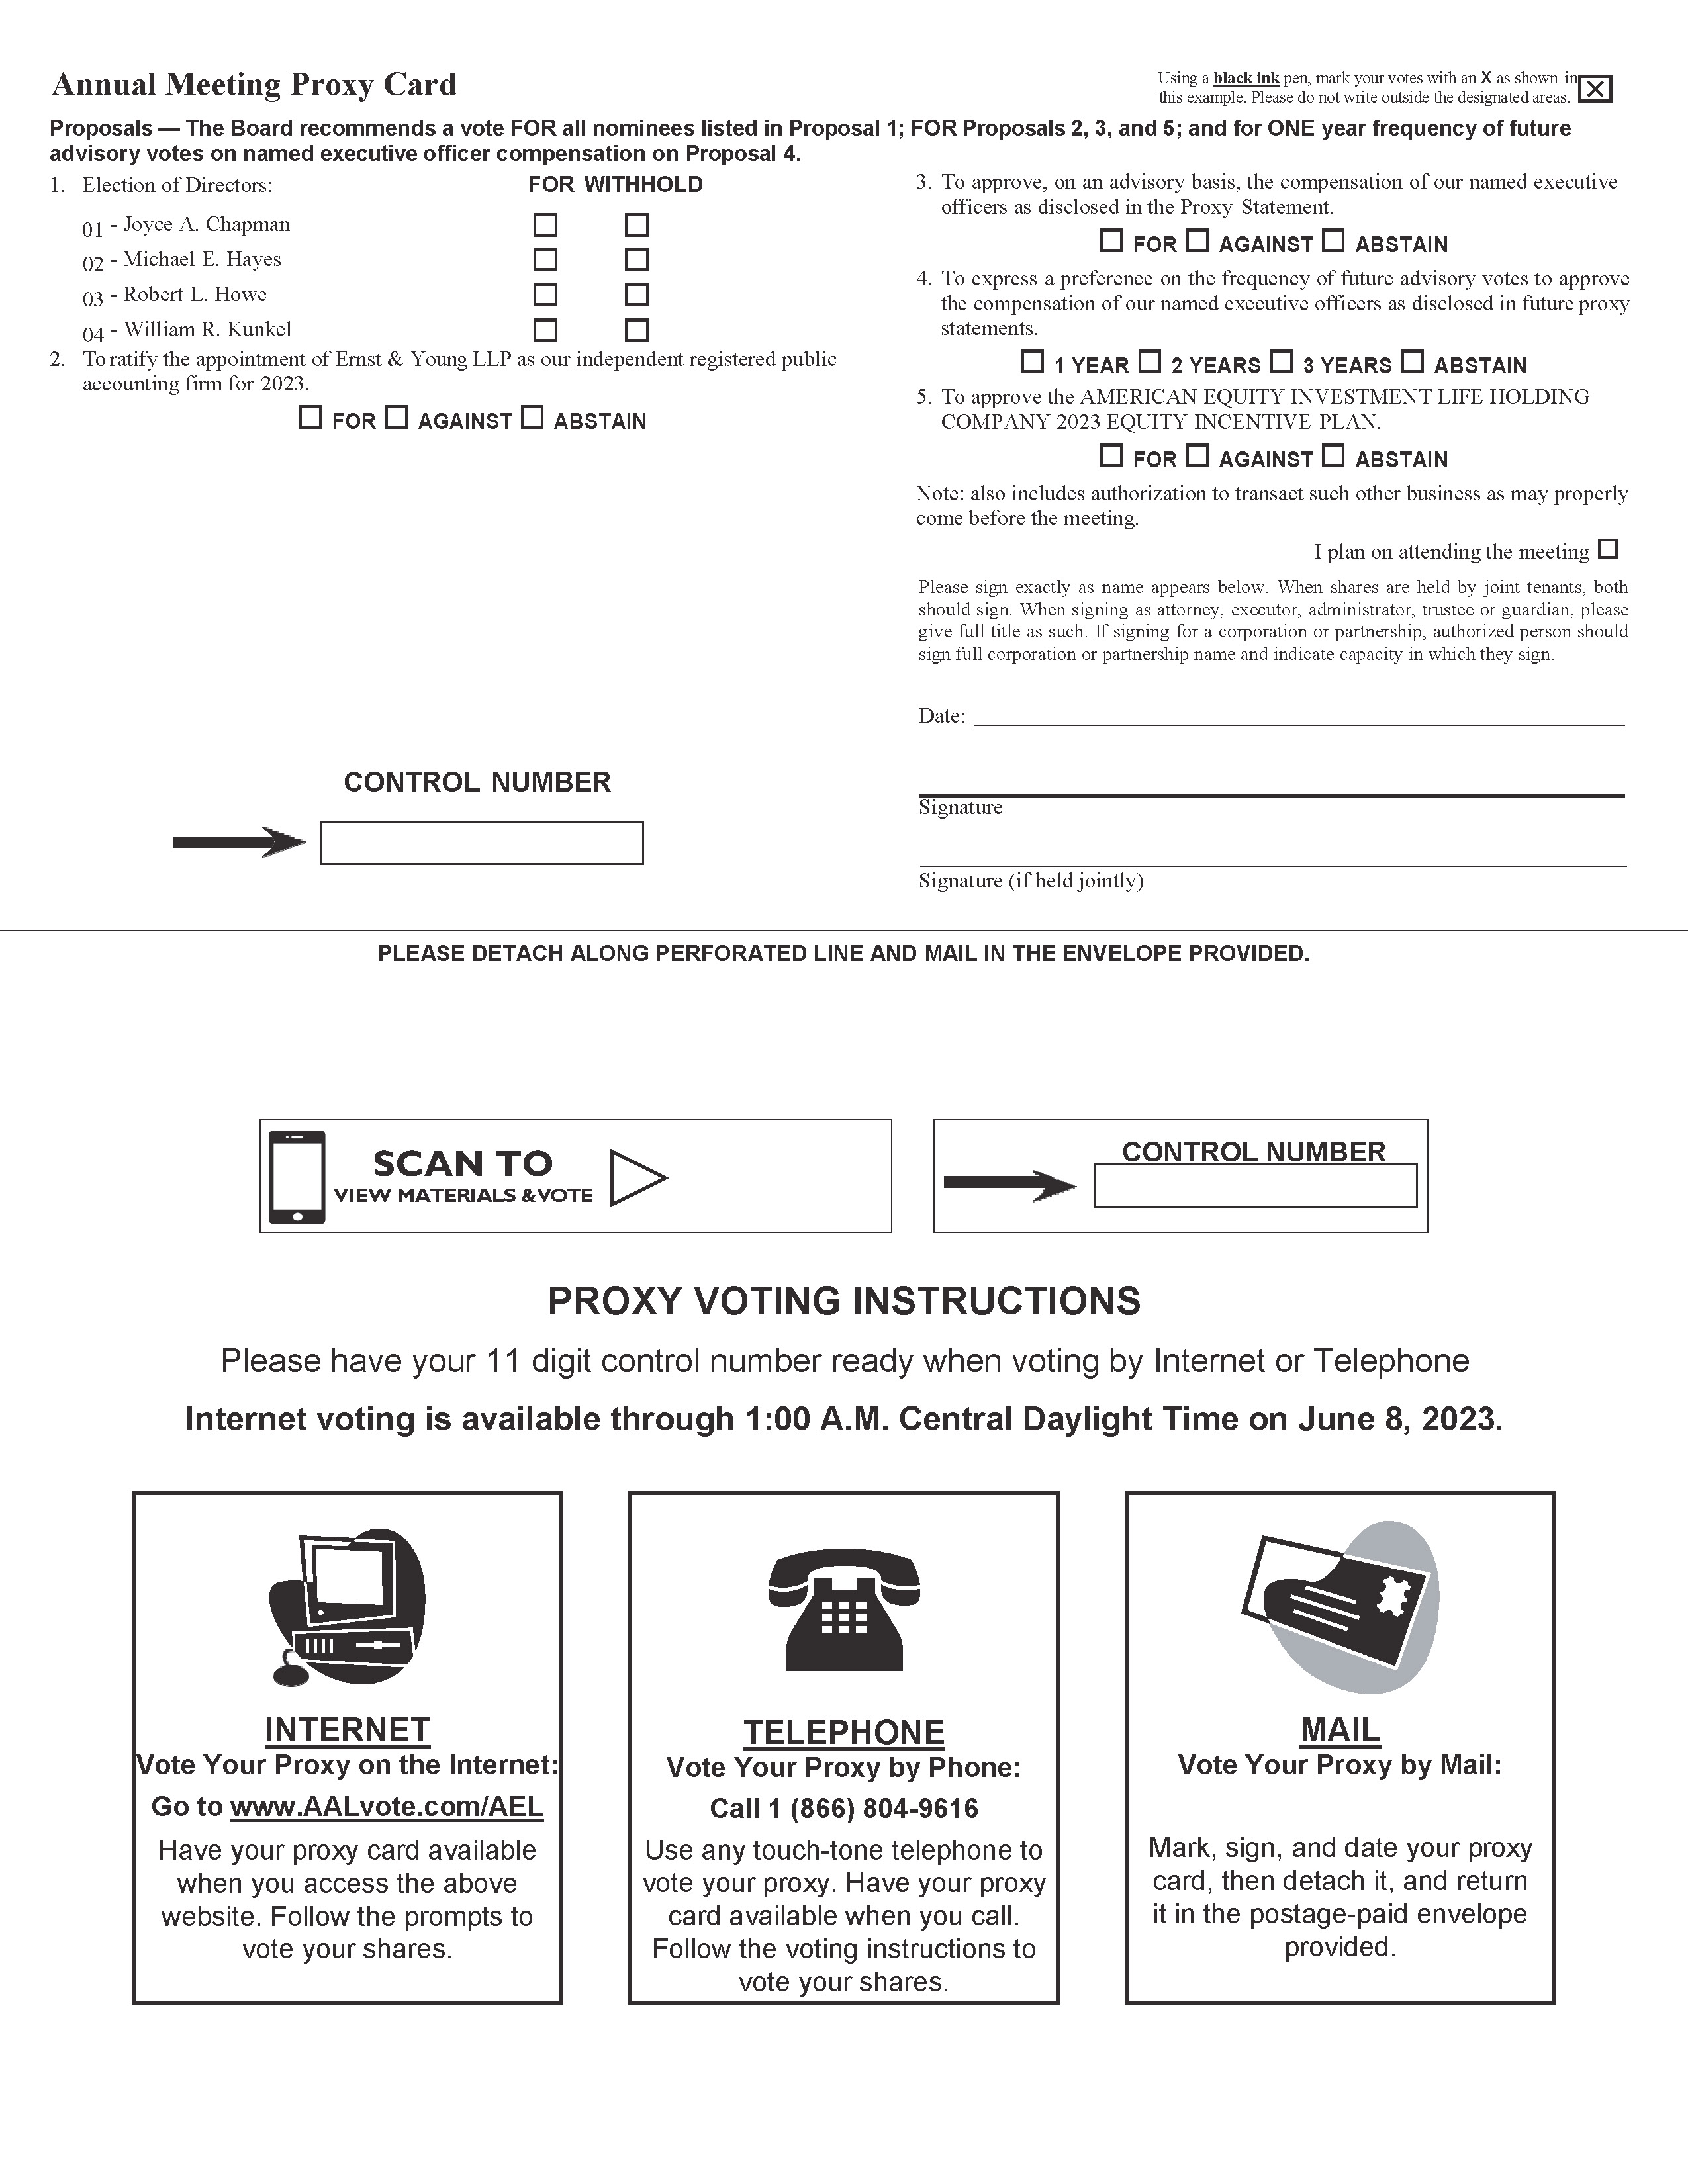 American Equity Proxy Card Proof # 3 APPROVED  FINAL_Page_2.jpg